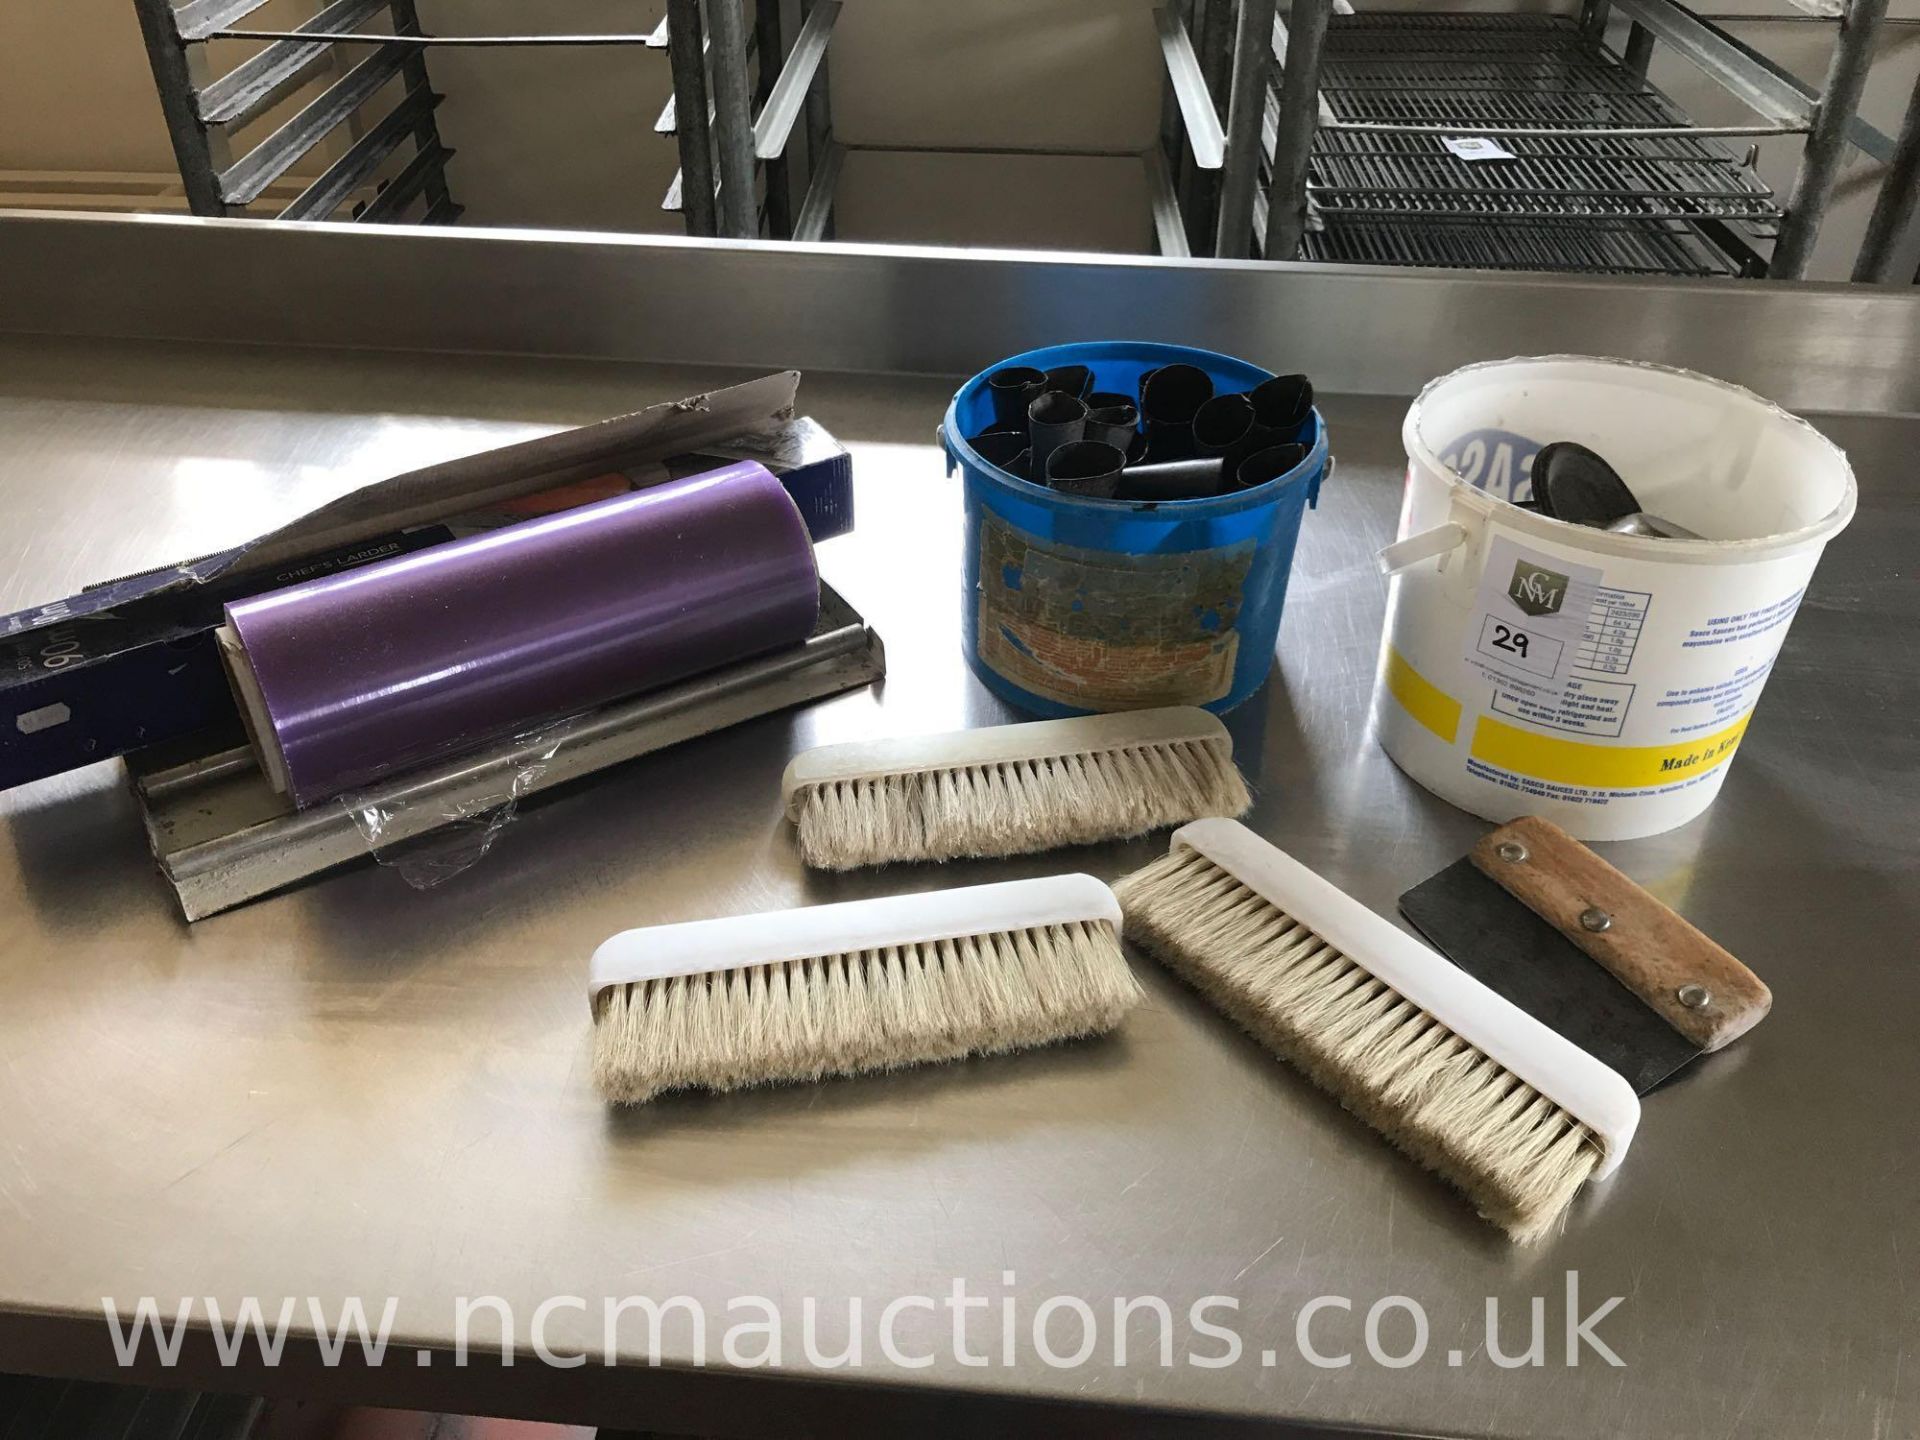 Selection of Baking Tins and Catering Equipment